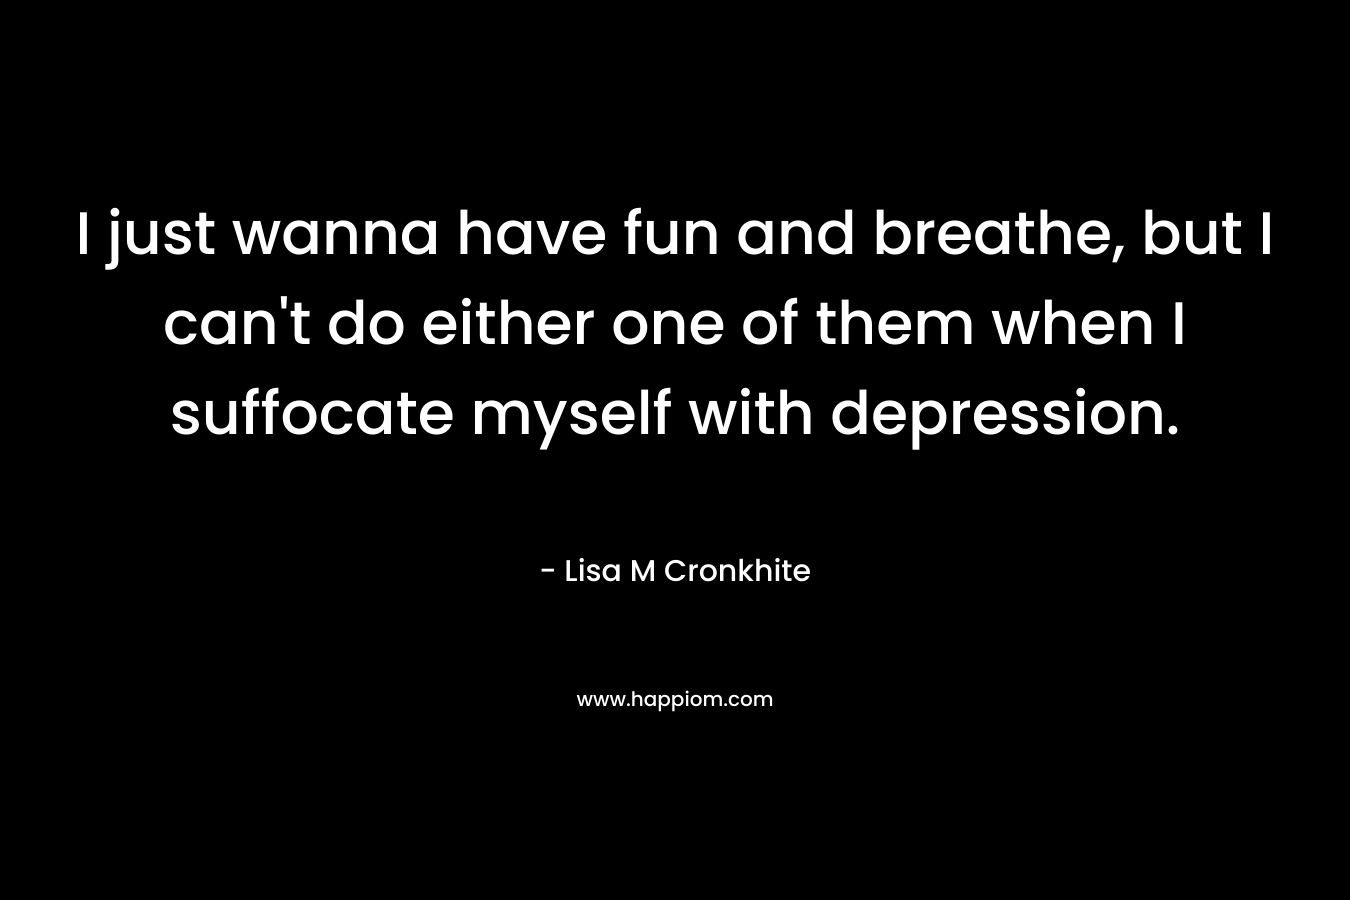 I just wanna have fun and breathe, but I can't do either one of them when I suffocate myself with depression.